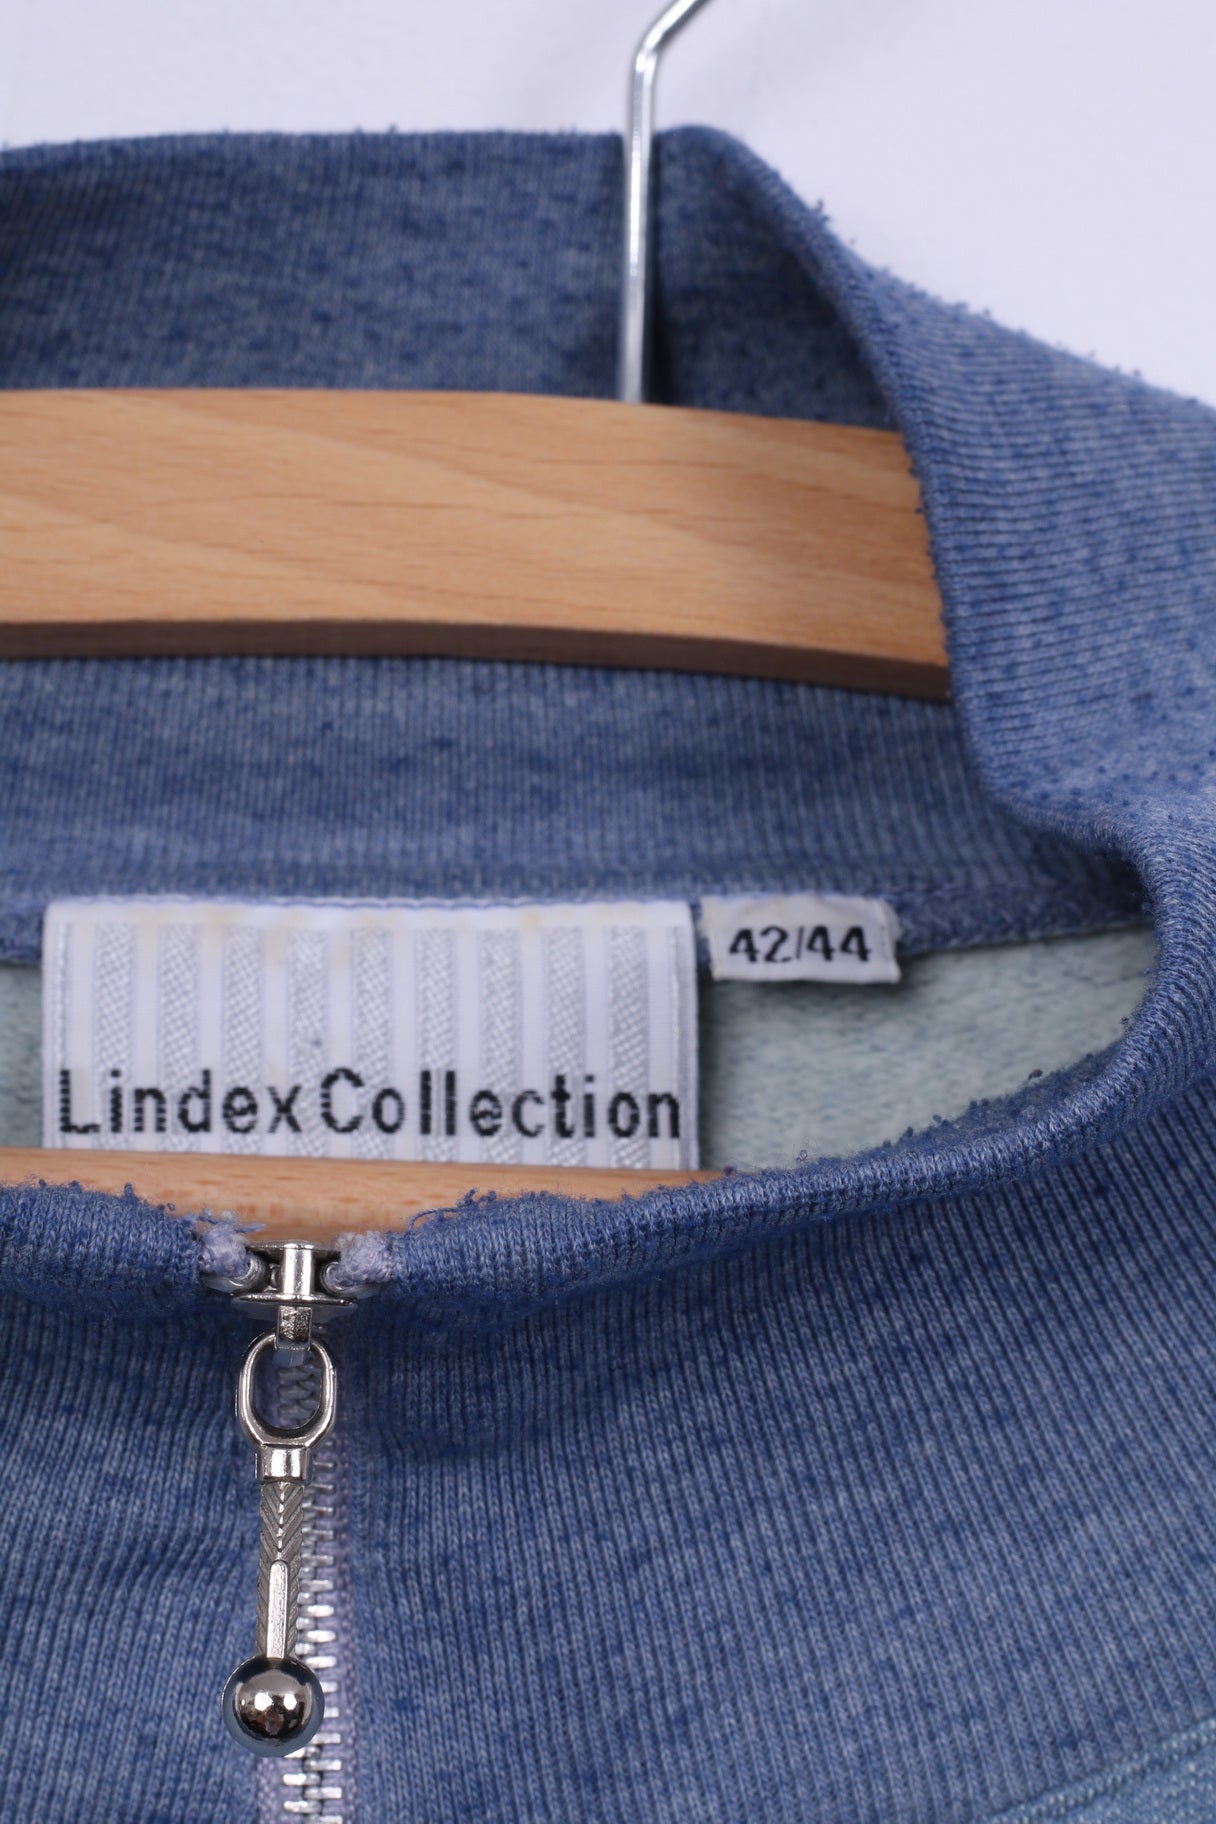 Lindex Collection For Women 42/44 XL Womens Graphic Jumper Zip Neck Blue Cotton